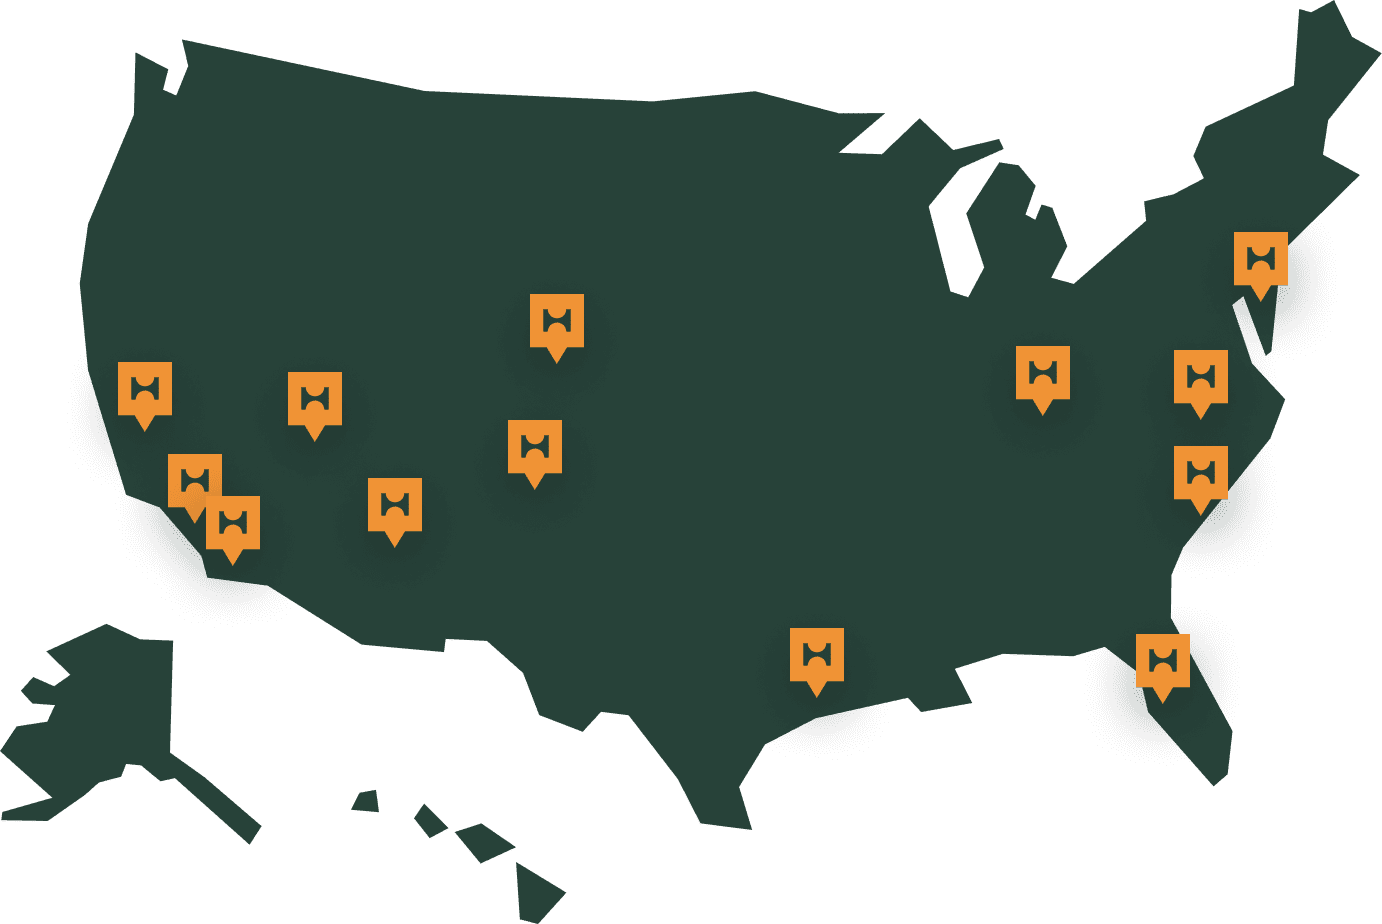 map of Headway office locations in USA